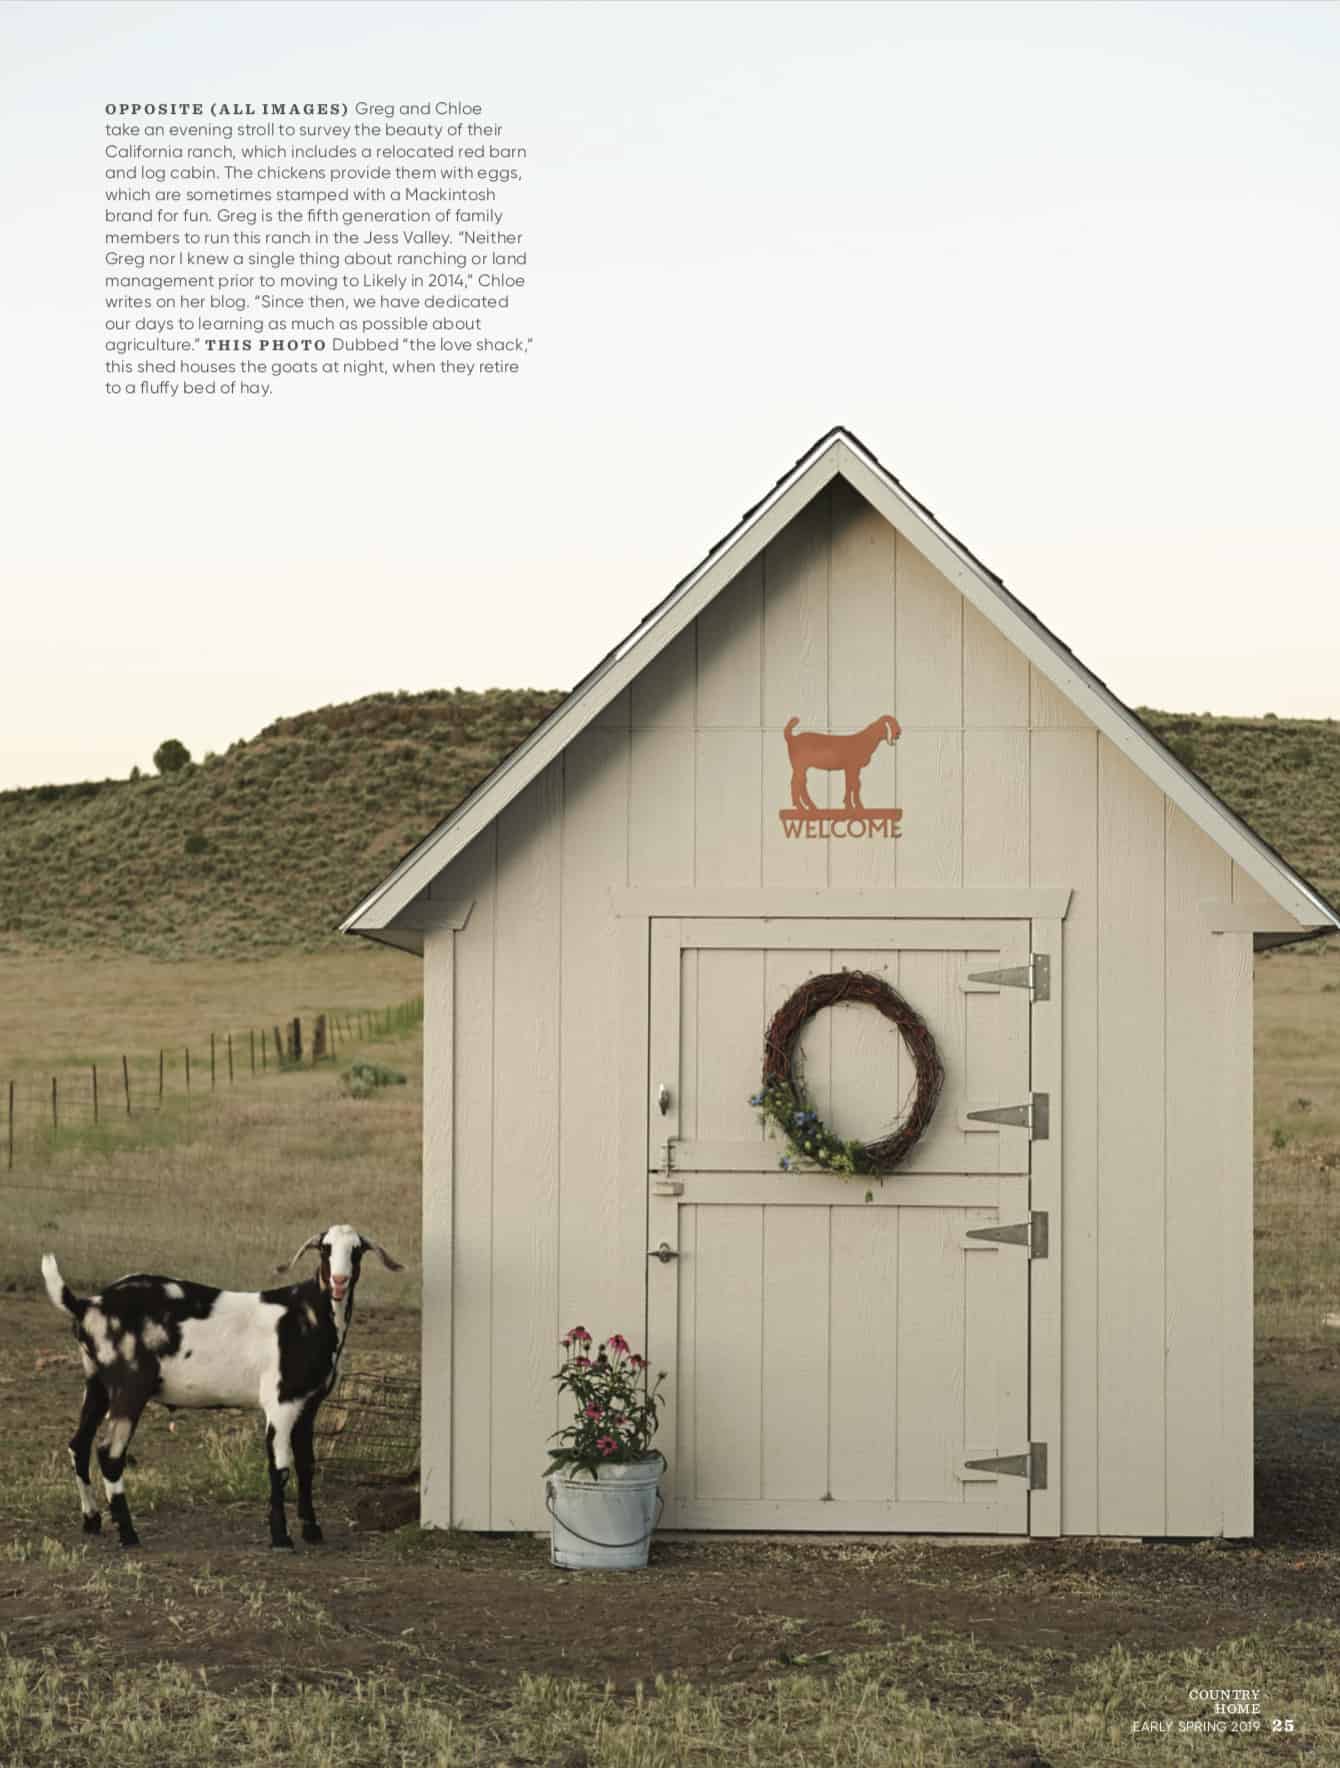 Come take a look into our home through the eyes of photographer Jay Wilde and stylist Lacey Howard in Country Home Magazine’s early spring 2019 edition!